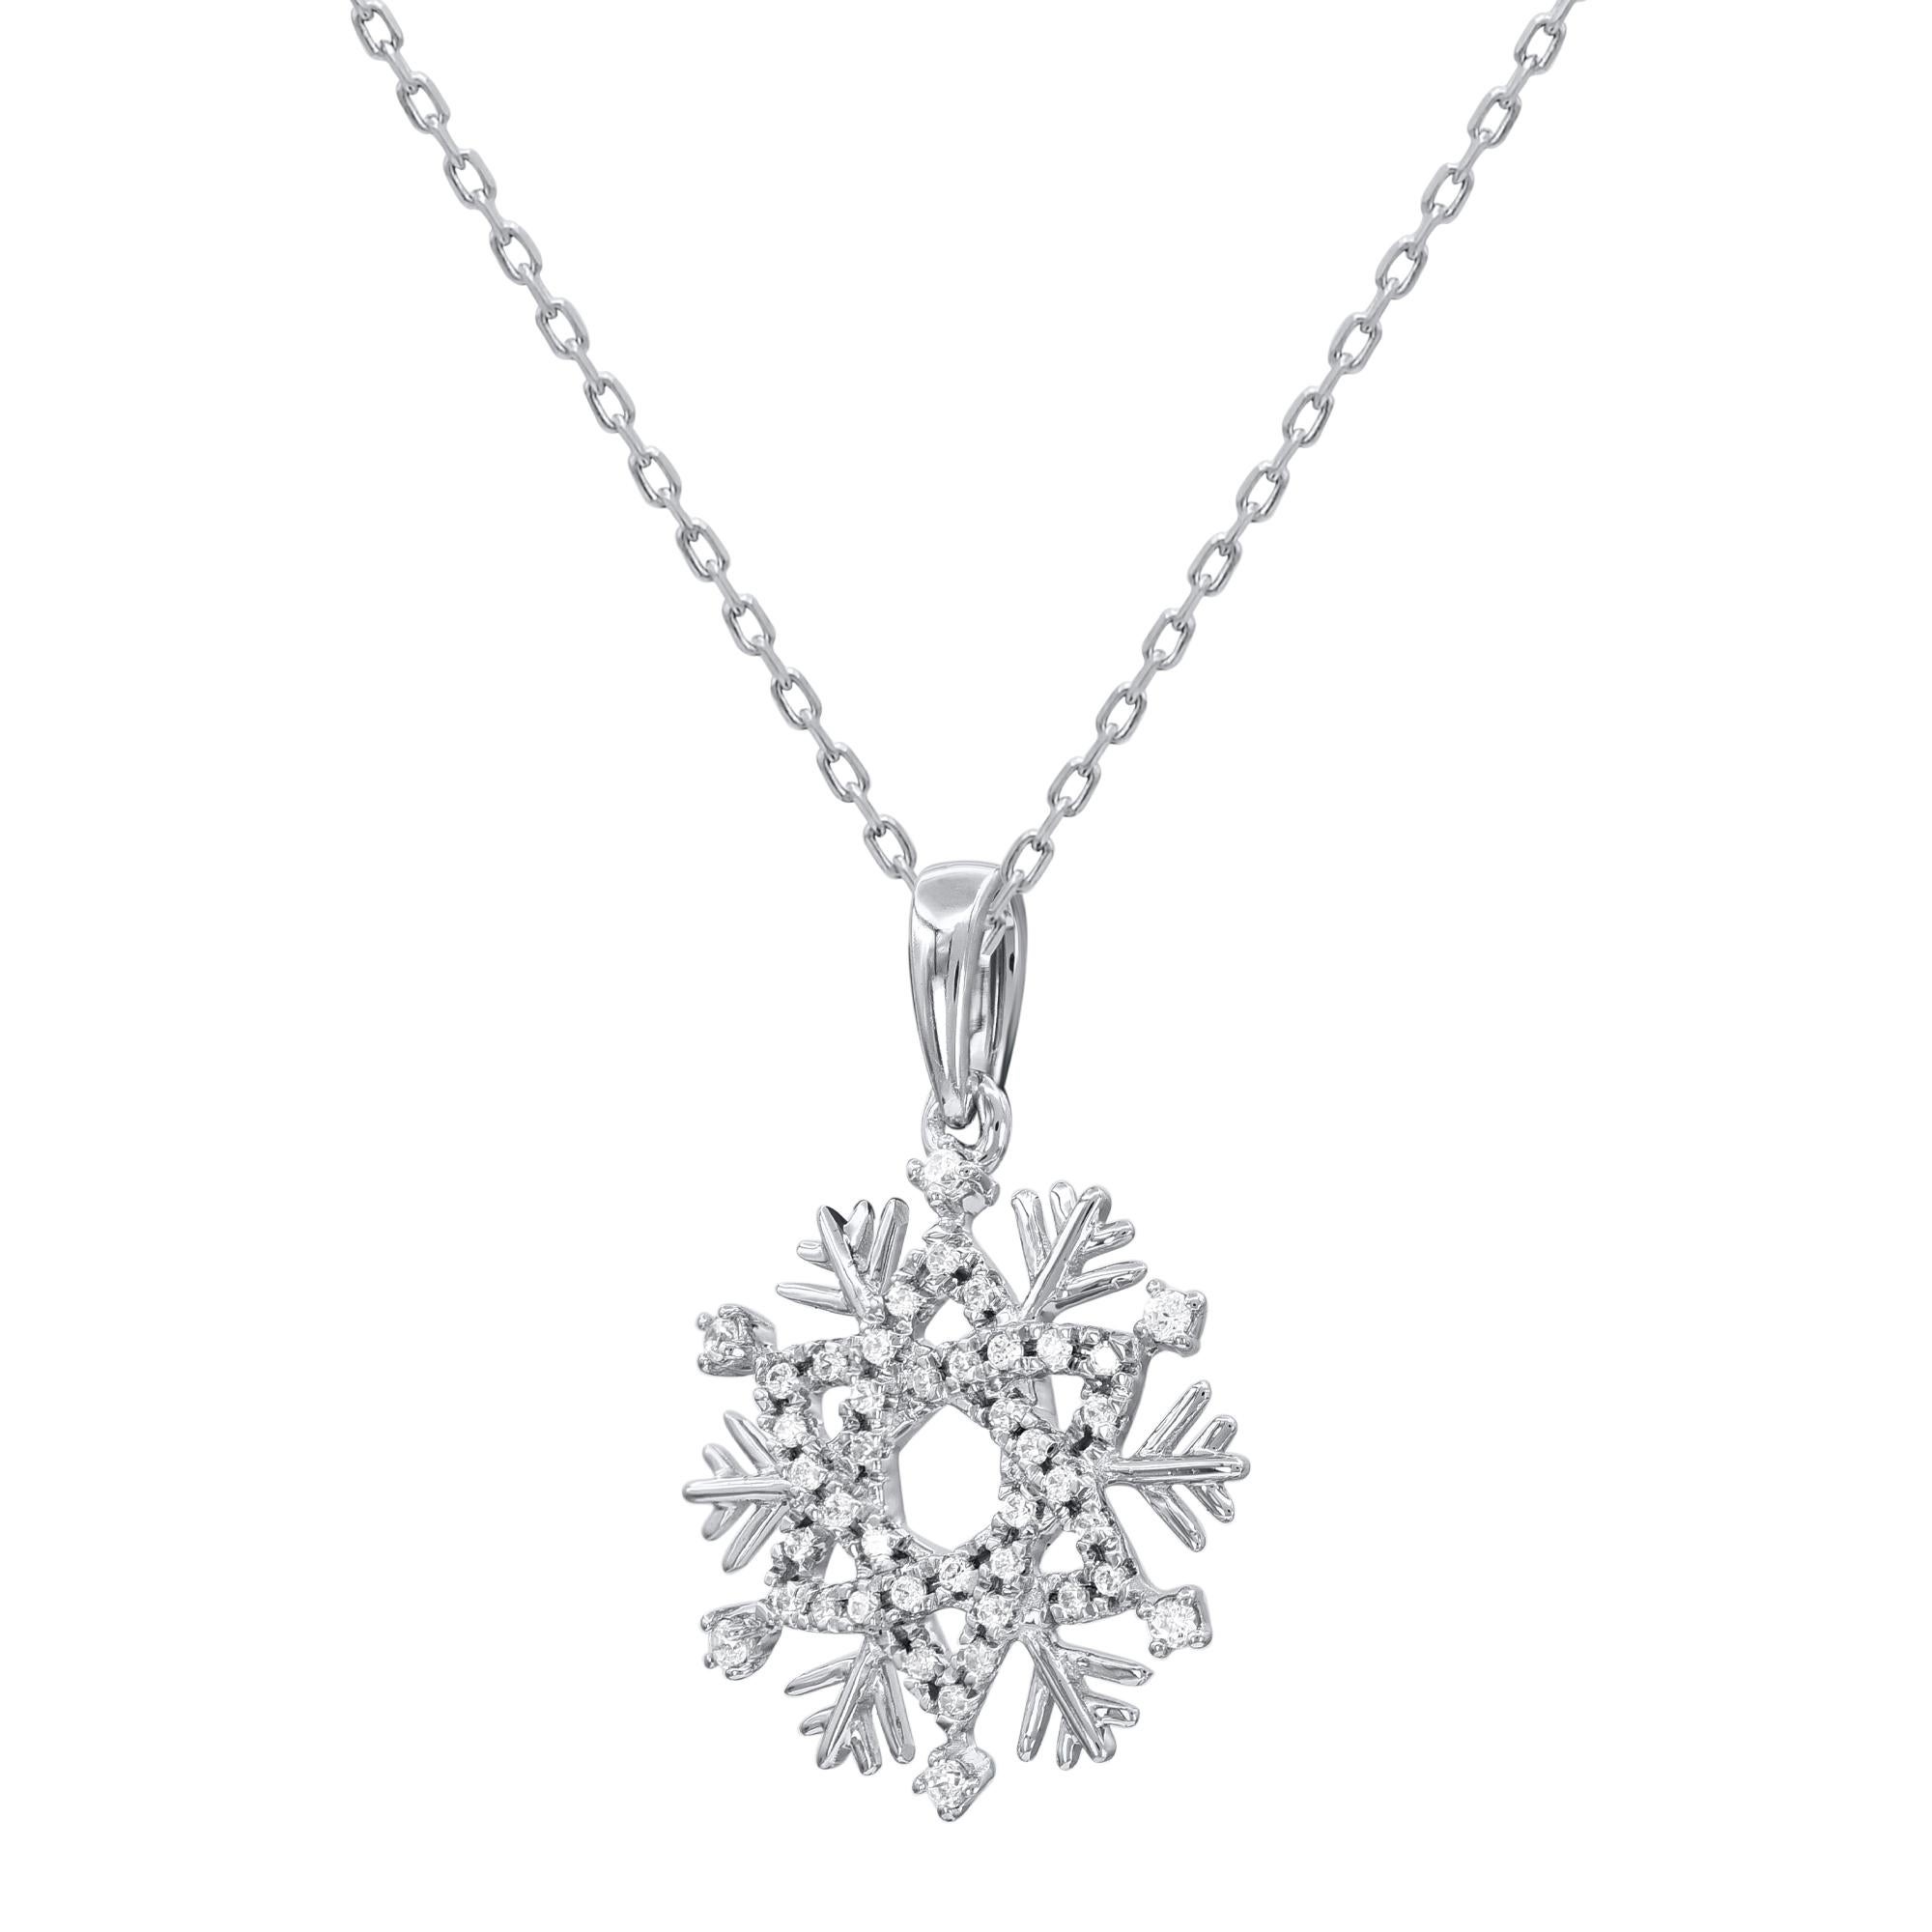 This snowflake diamond pendant fits any occasion with ease. These pendants are studded with 42 Single cut natural diamonds in prongs setting in 18 karat white gold. Diamonds are graded as H-I color and I-2 clarity. Pendant suspends along a cable